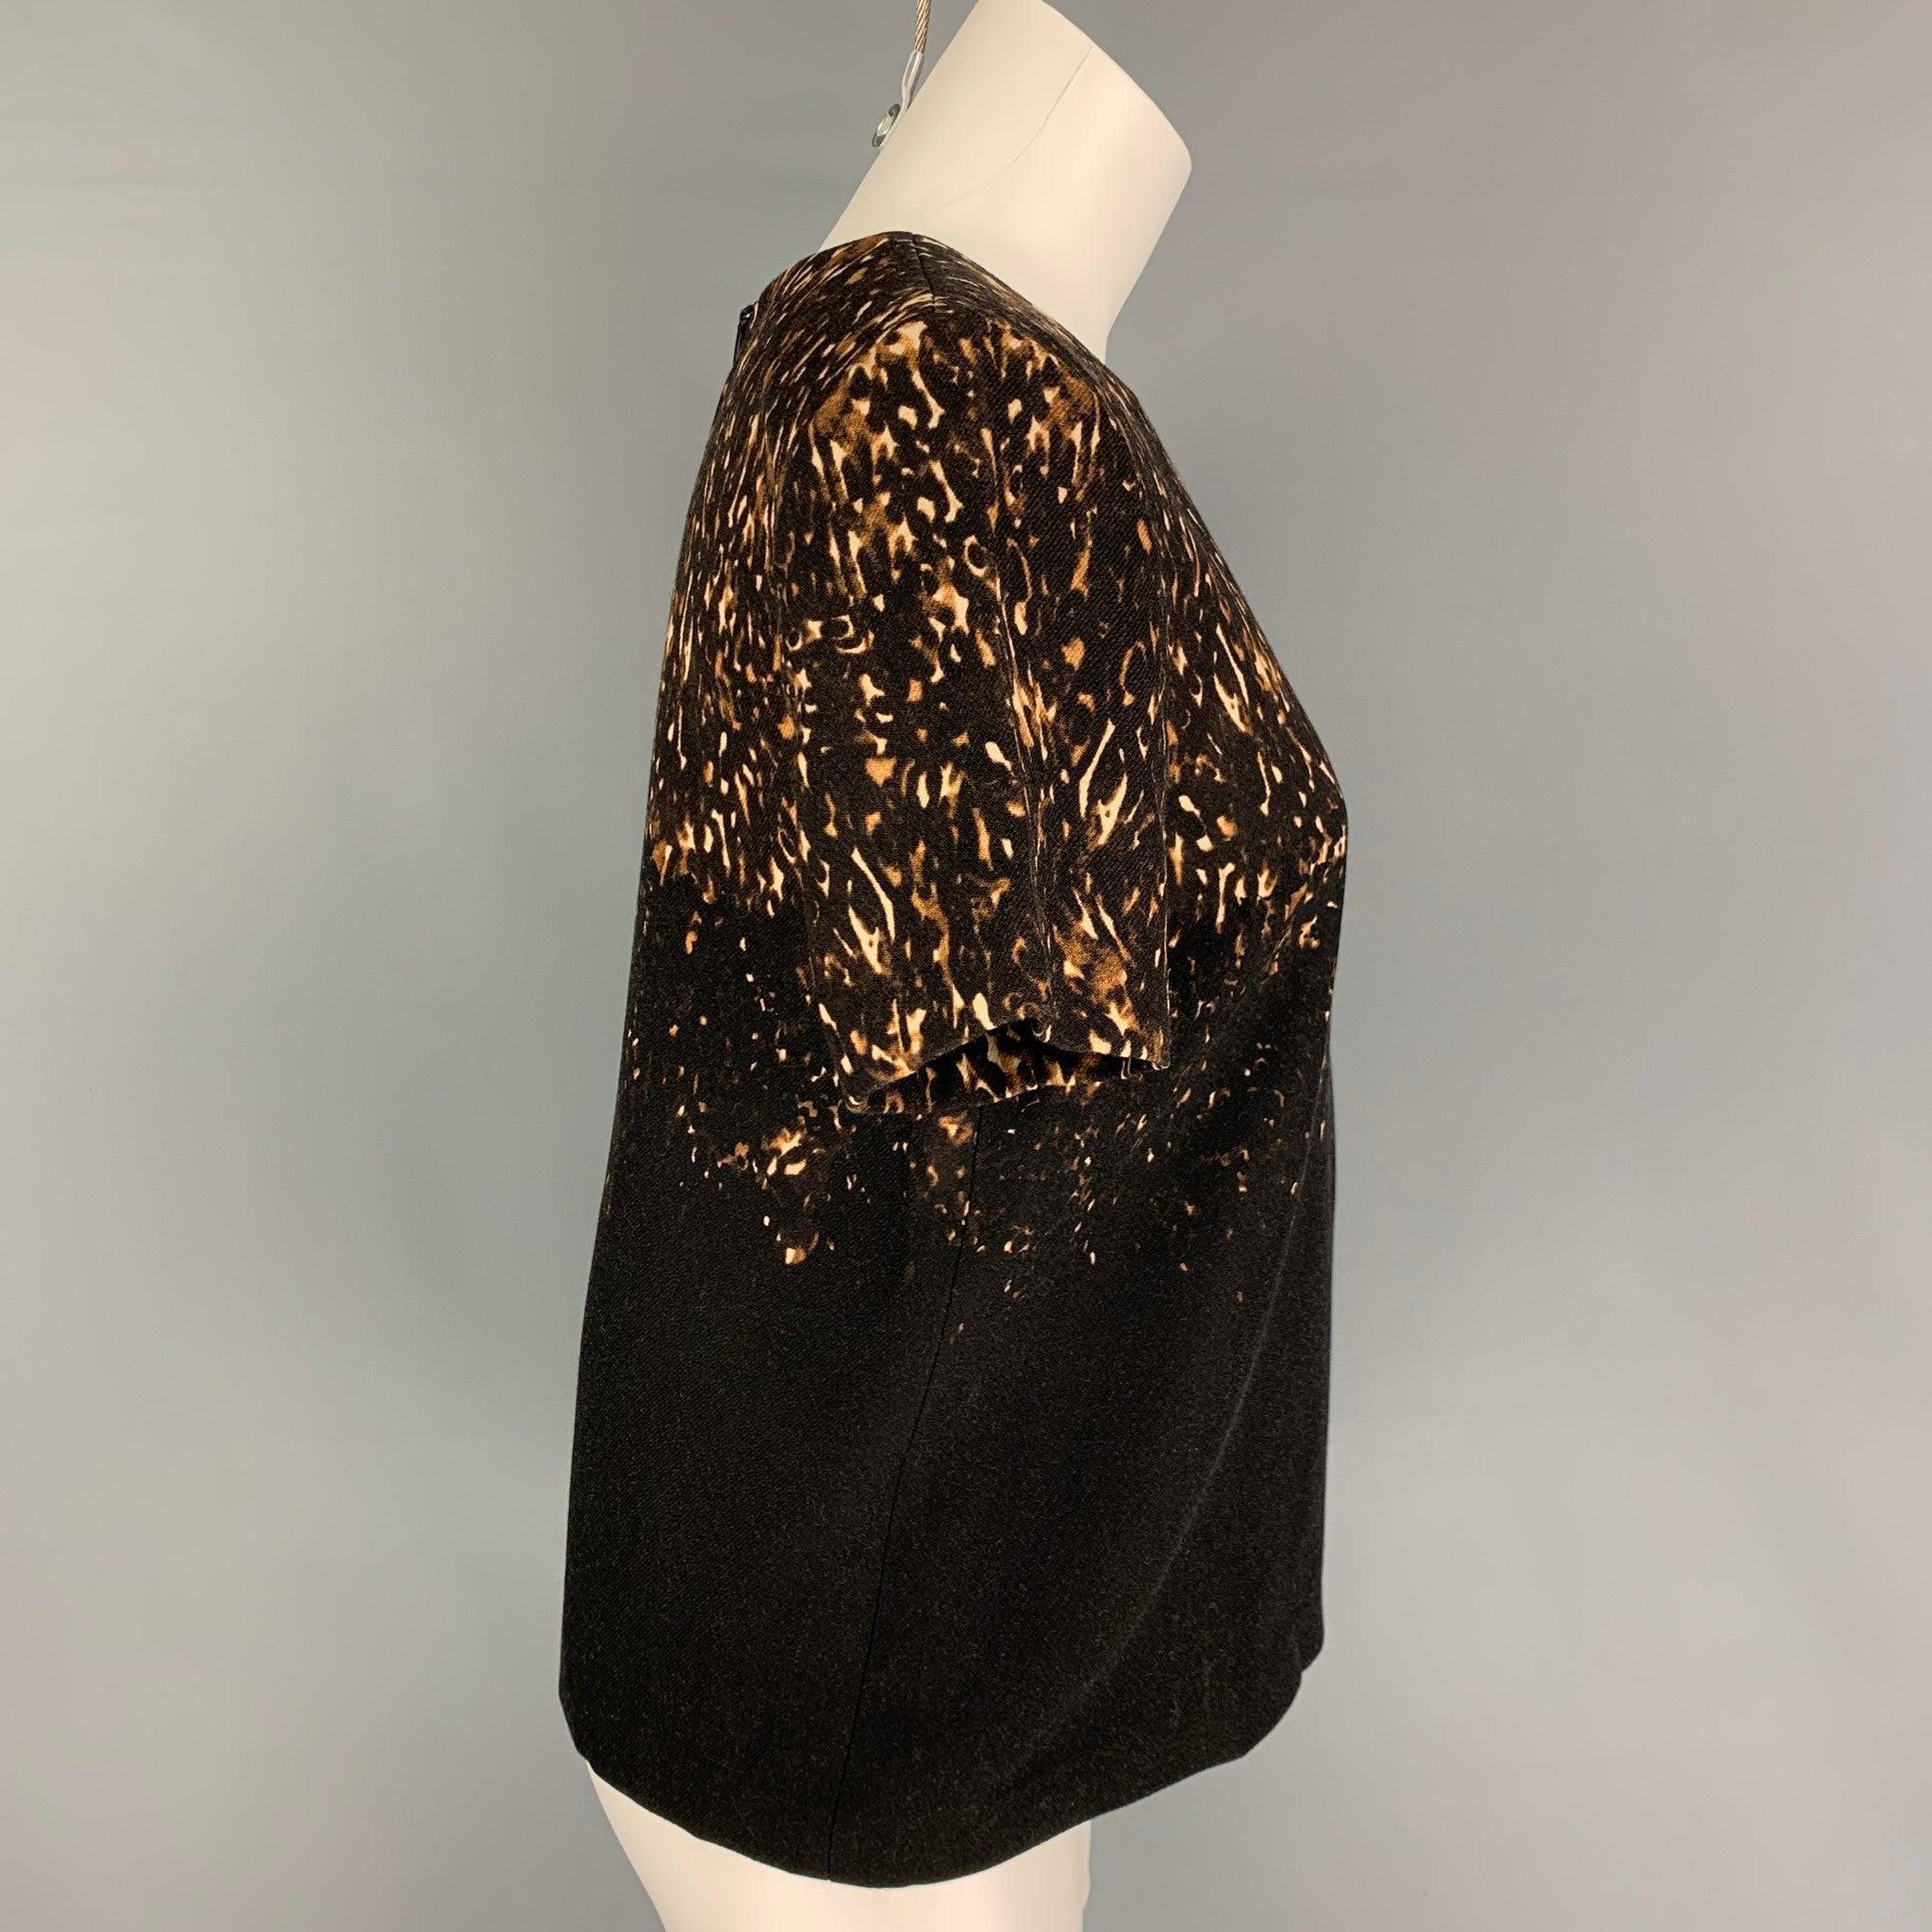 BURBERRY PRORSUM dress top comes in a black & brown print wool featuring short sleeves, crew-neck, and a back zip up closure. Made in Italy.
Very Good
Pre-Owned Condition. 

Marked:   42 

Measurements: 
 
Shoulder: 15 inches Bust: 36 inches 